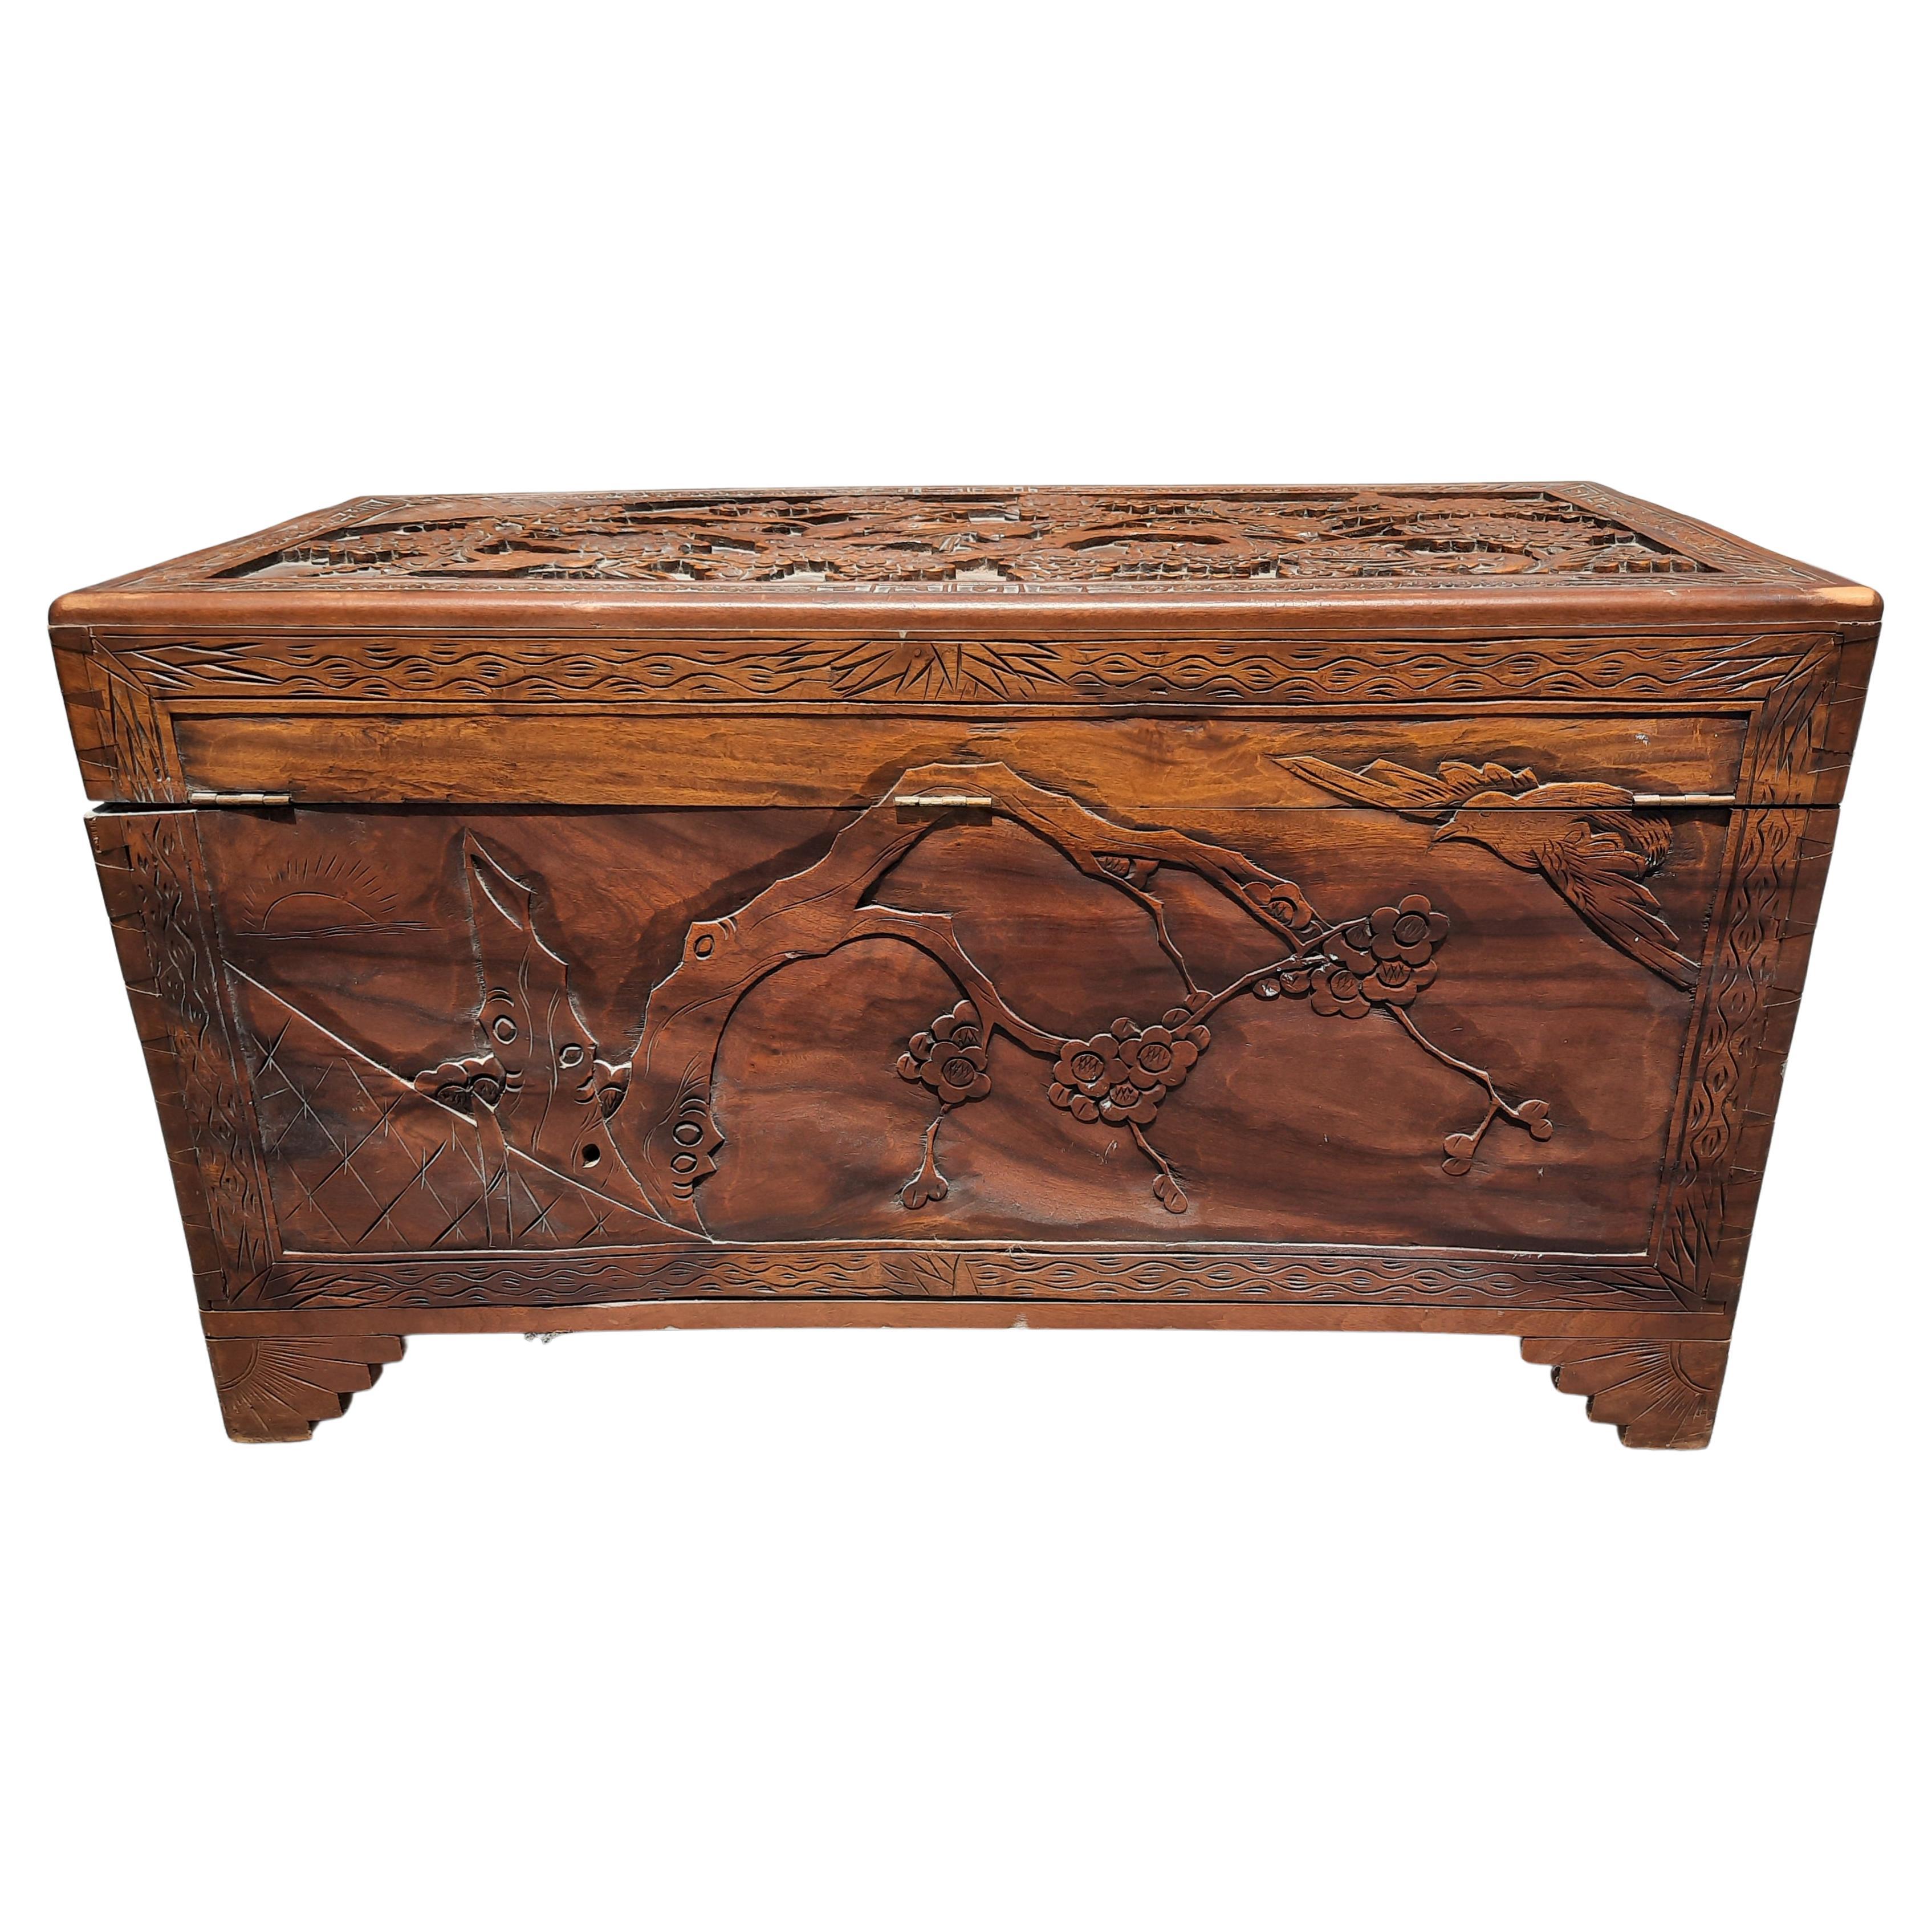 20th Century 19th Century Heavily Hand Carved Asian Blanket Chest Trunk For Sale